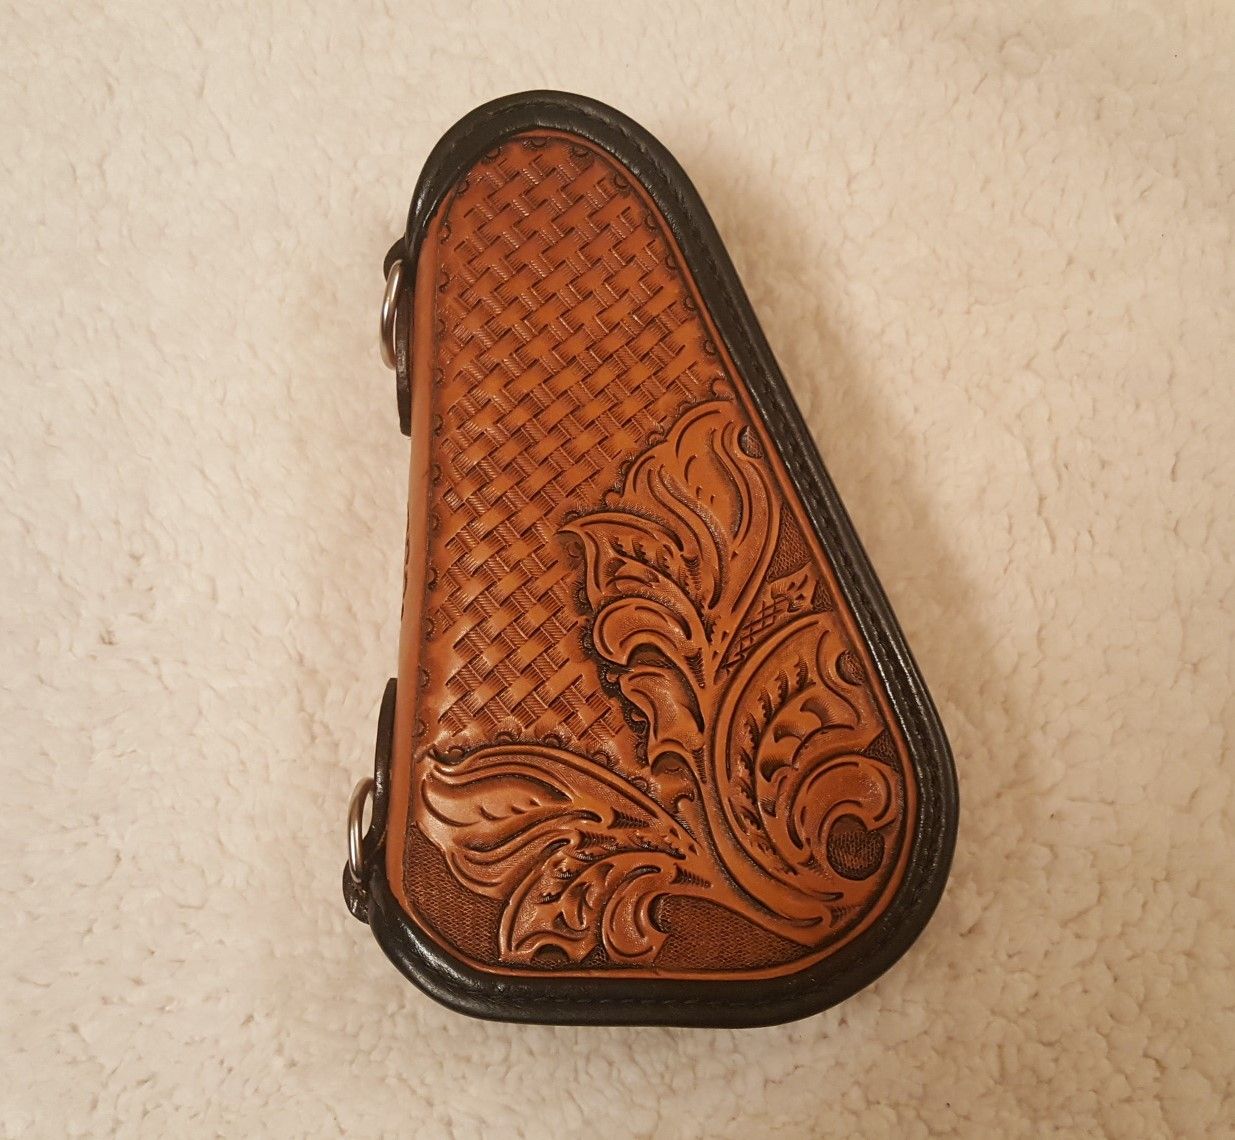 Buy A Handmade Hand Tooled Leather Pistol Caddy Small Made To